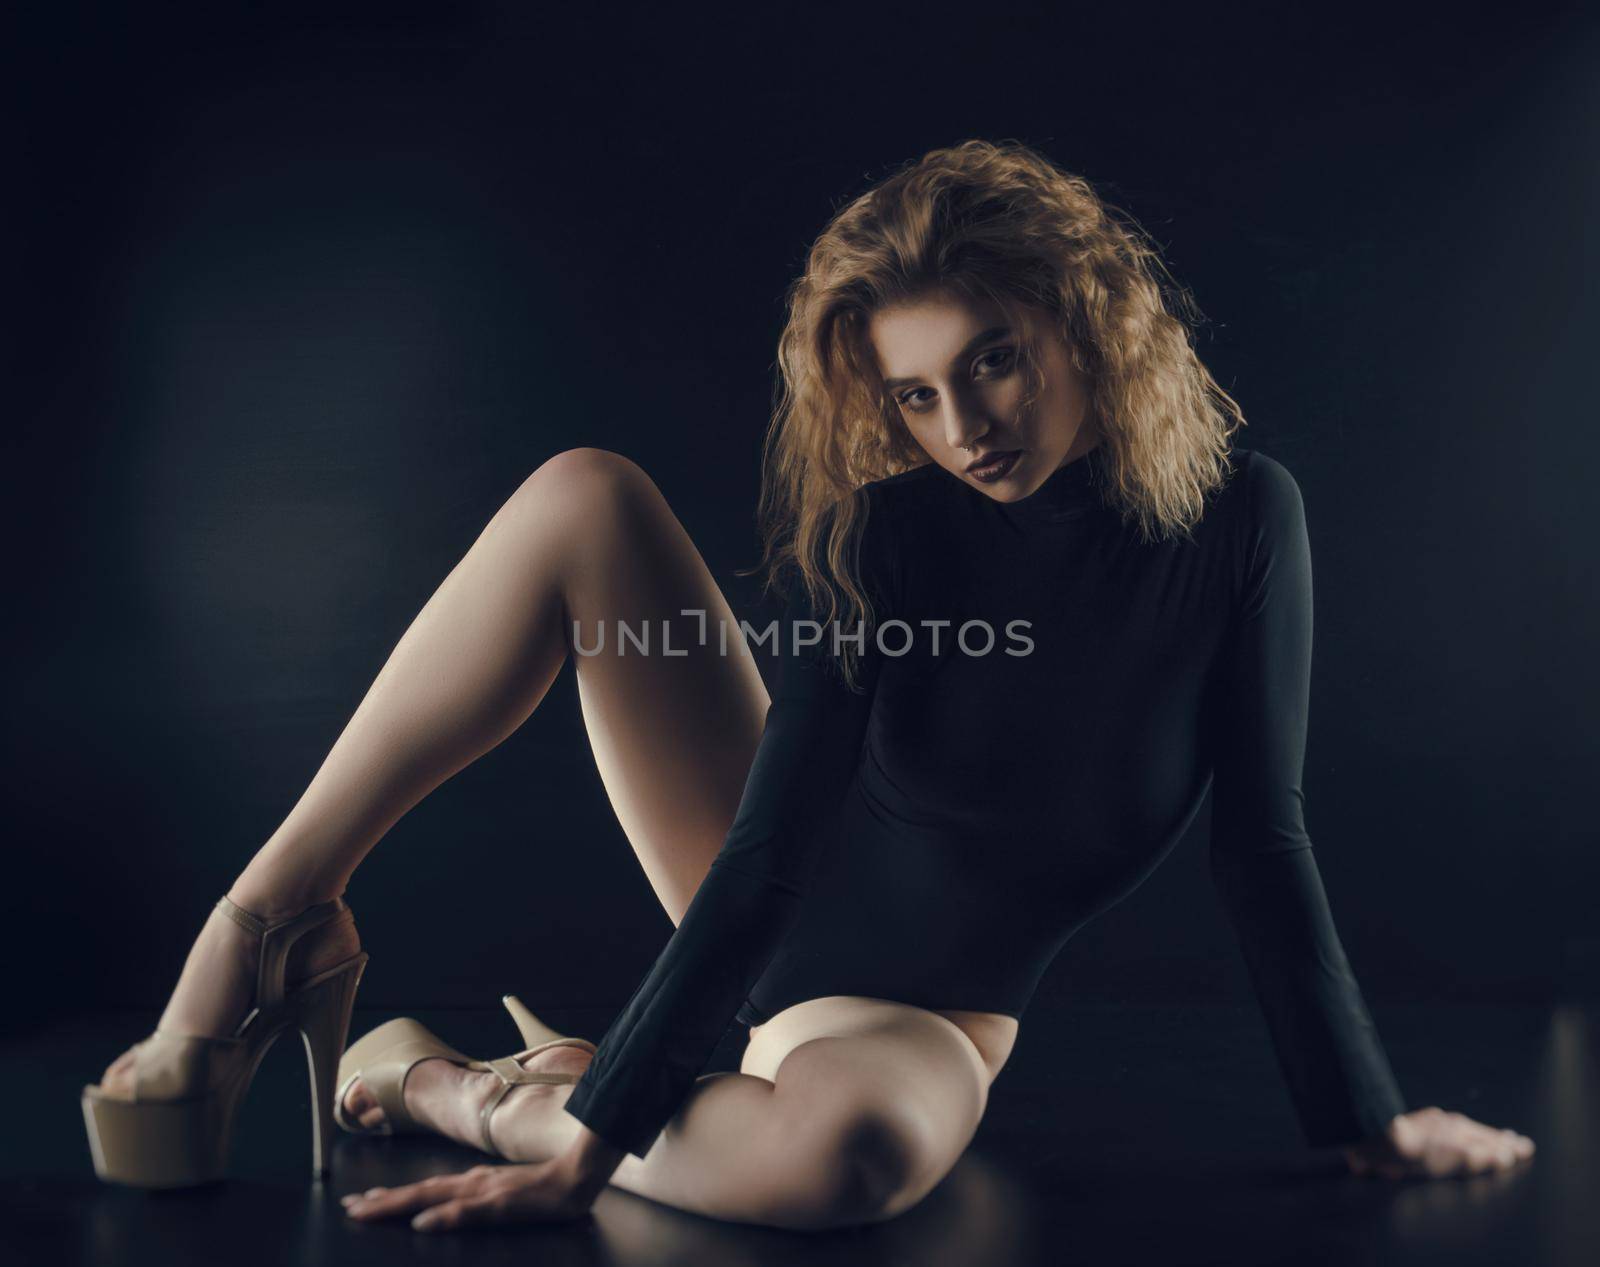 flexible sexy girl poses on a black background in the fitting clothes baud by Rotozey